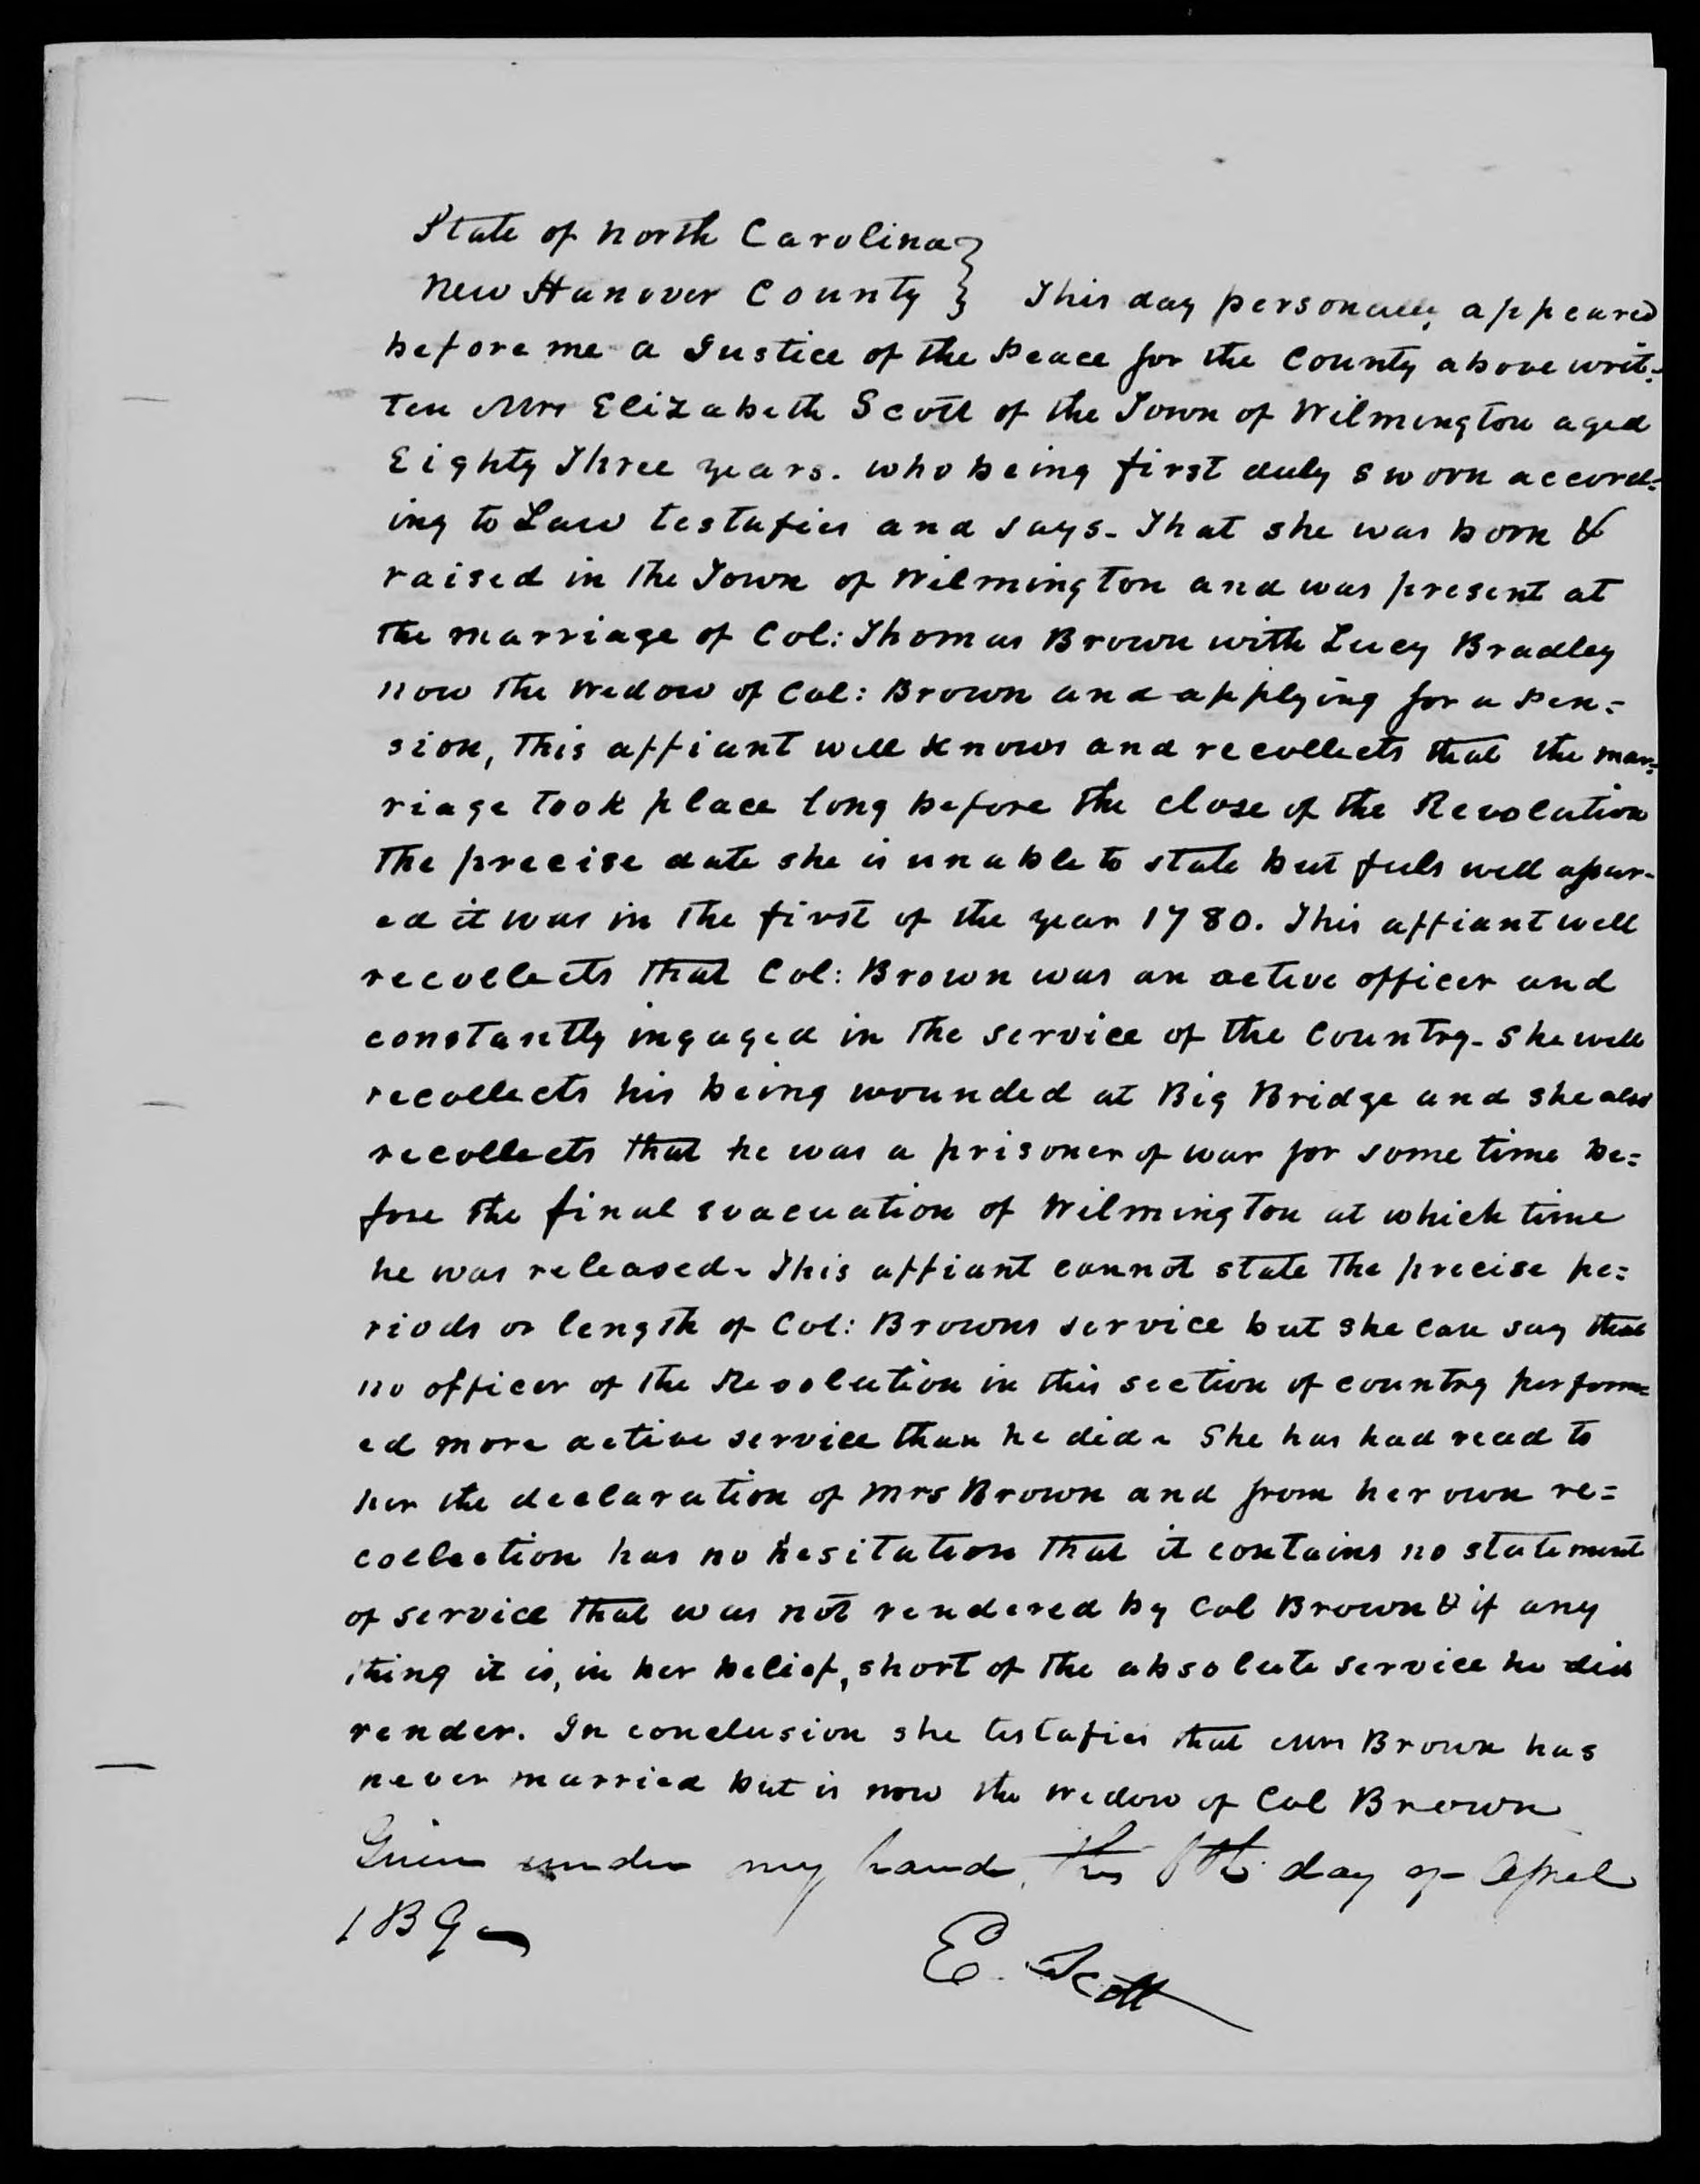 Affidavit of Elizabeth Scott in support of a Pension Claim for Lucy Brown, 6 April 1839, page 1